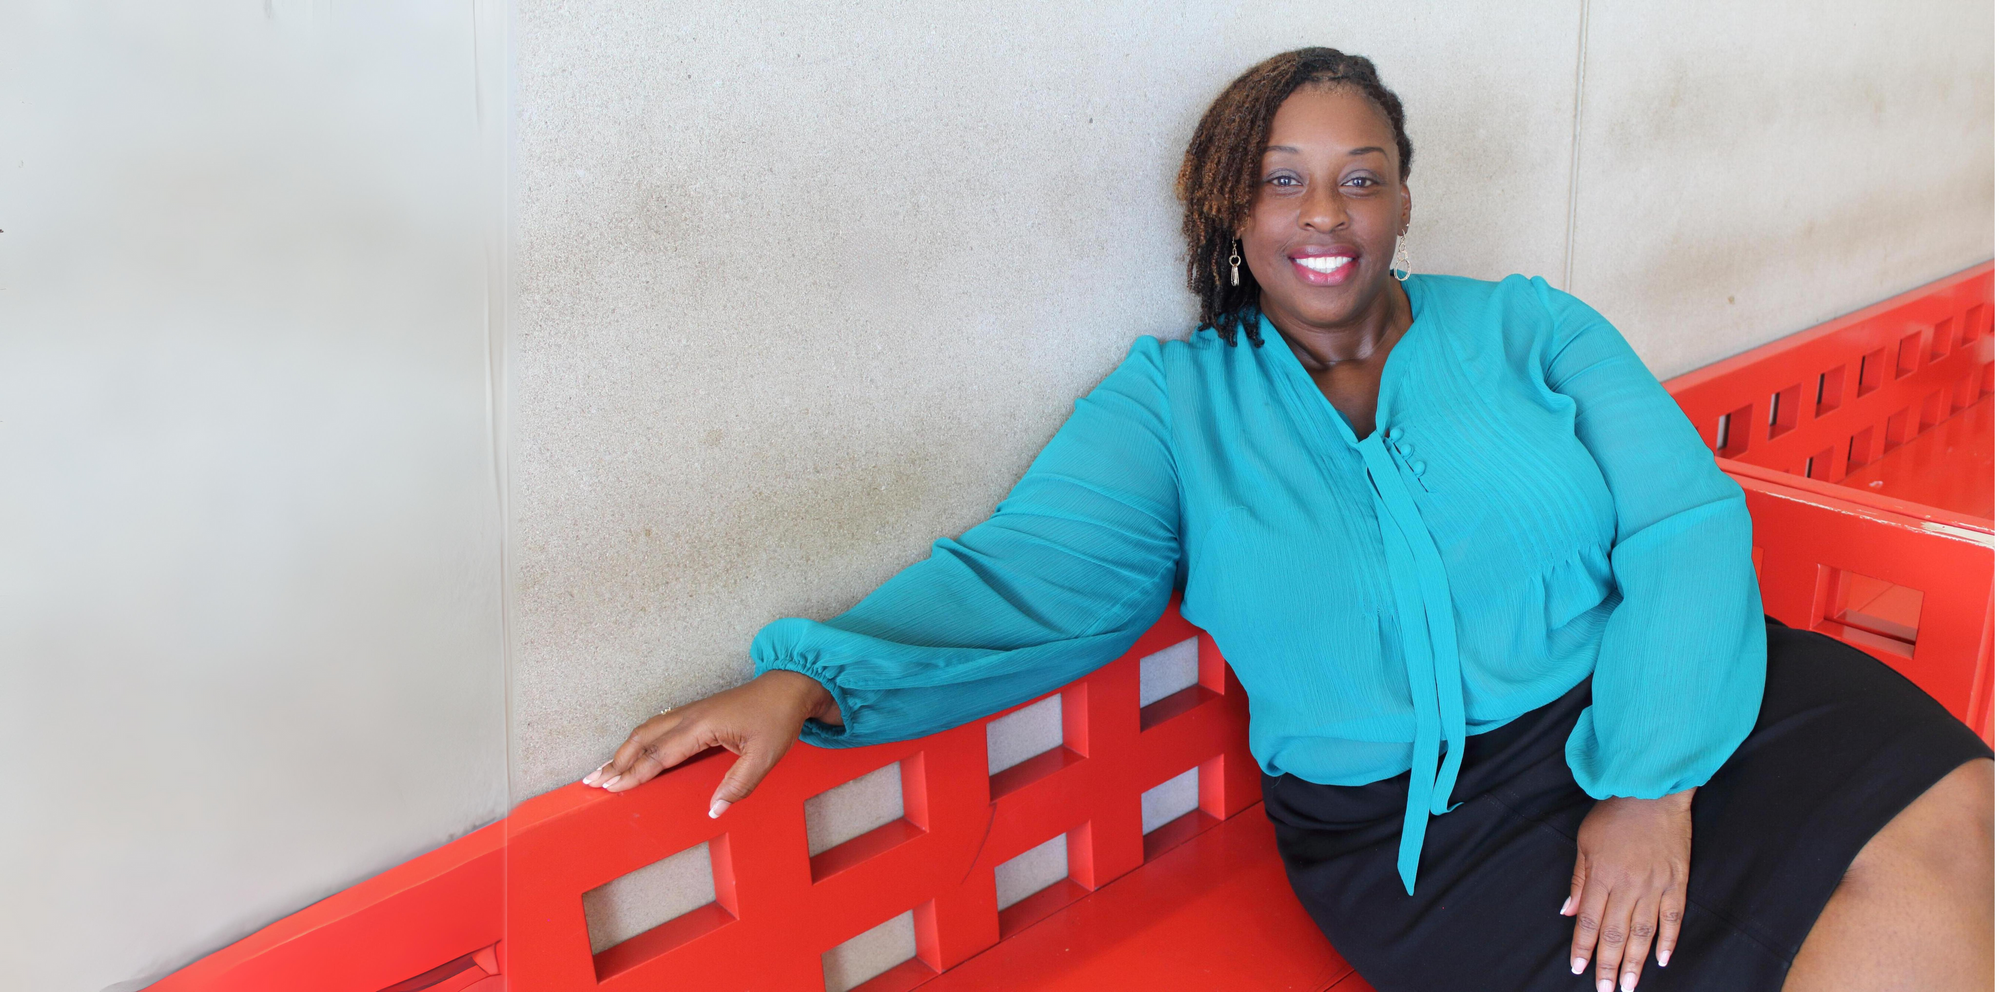 Professor Allen in a blue shirt and black skirt sitting on a red bench.